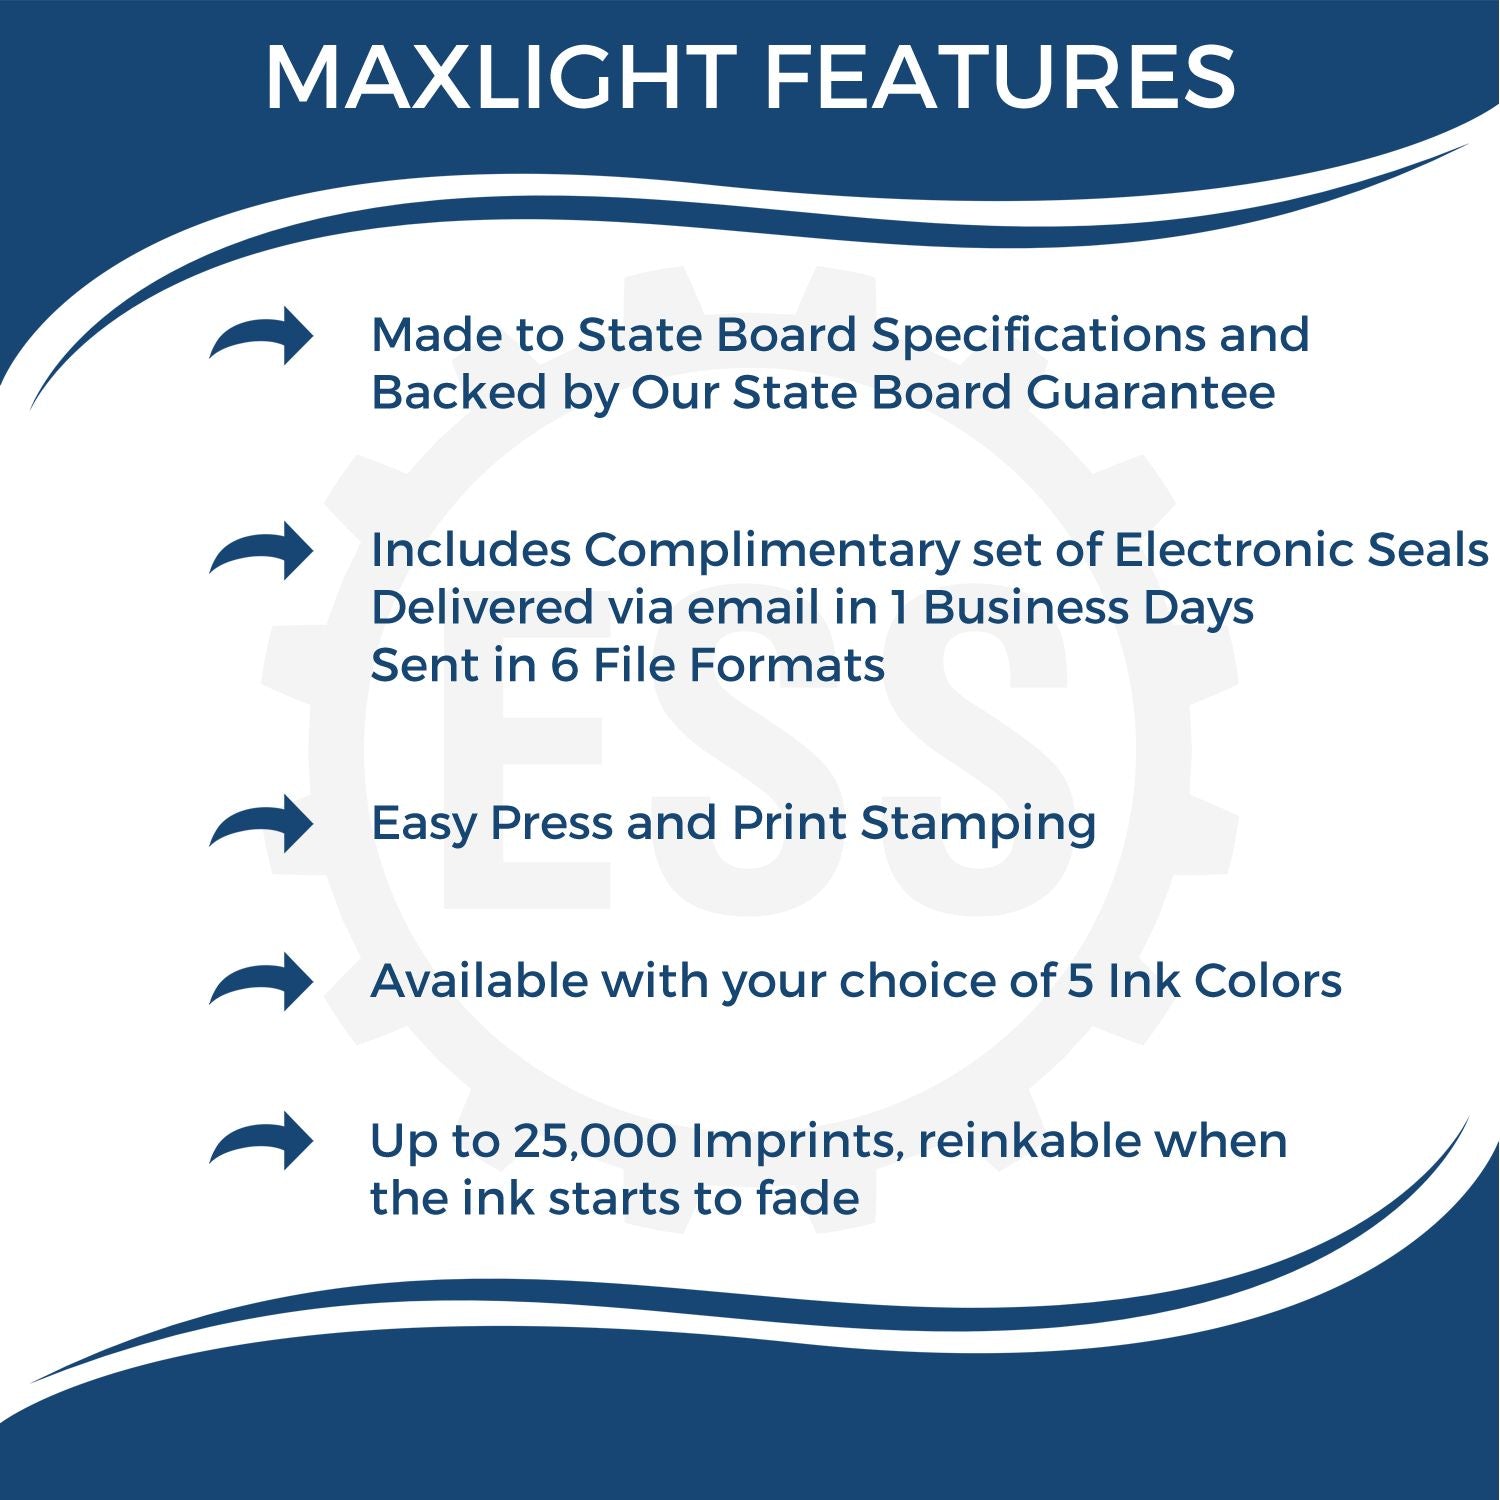 A picture of an infographic highlighting the selling points for the Premium MaxLight Pre-Inked New Mexico Engineering Stamp